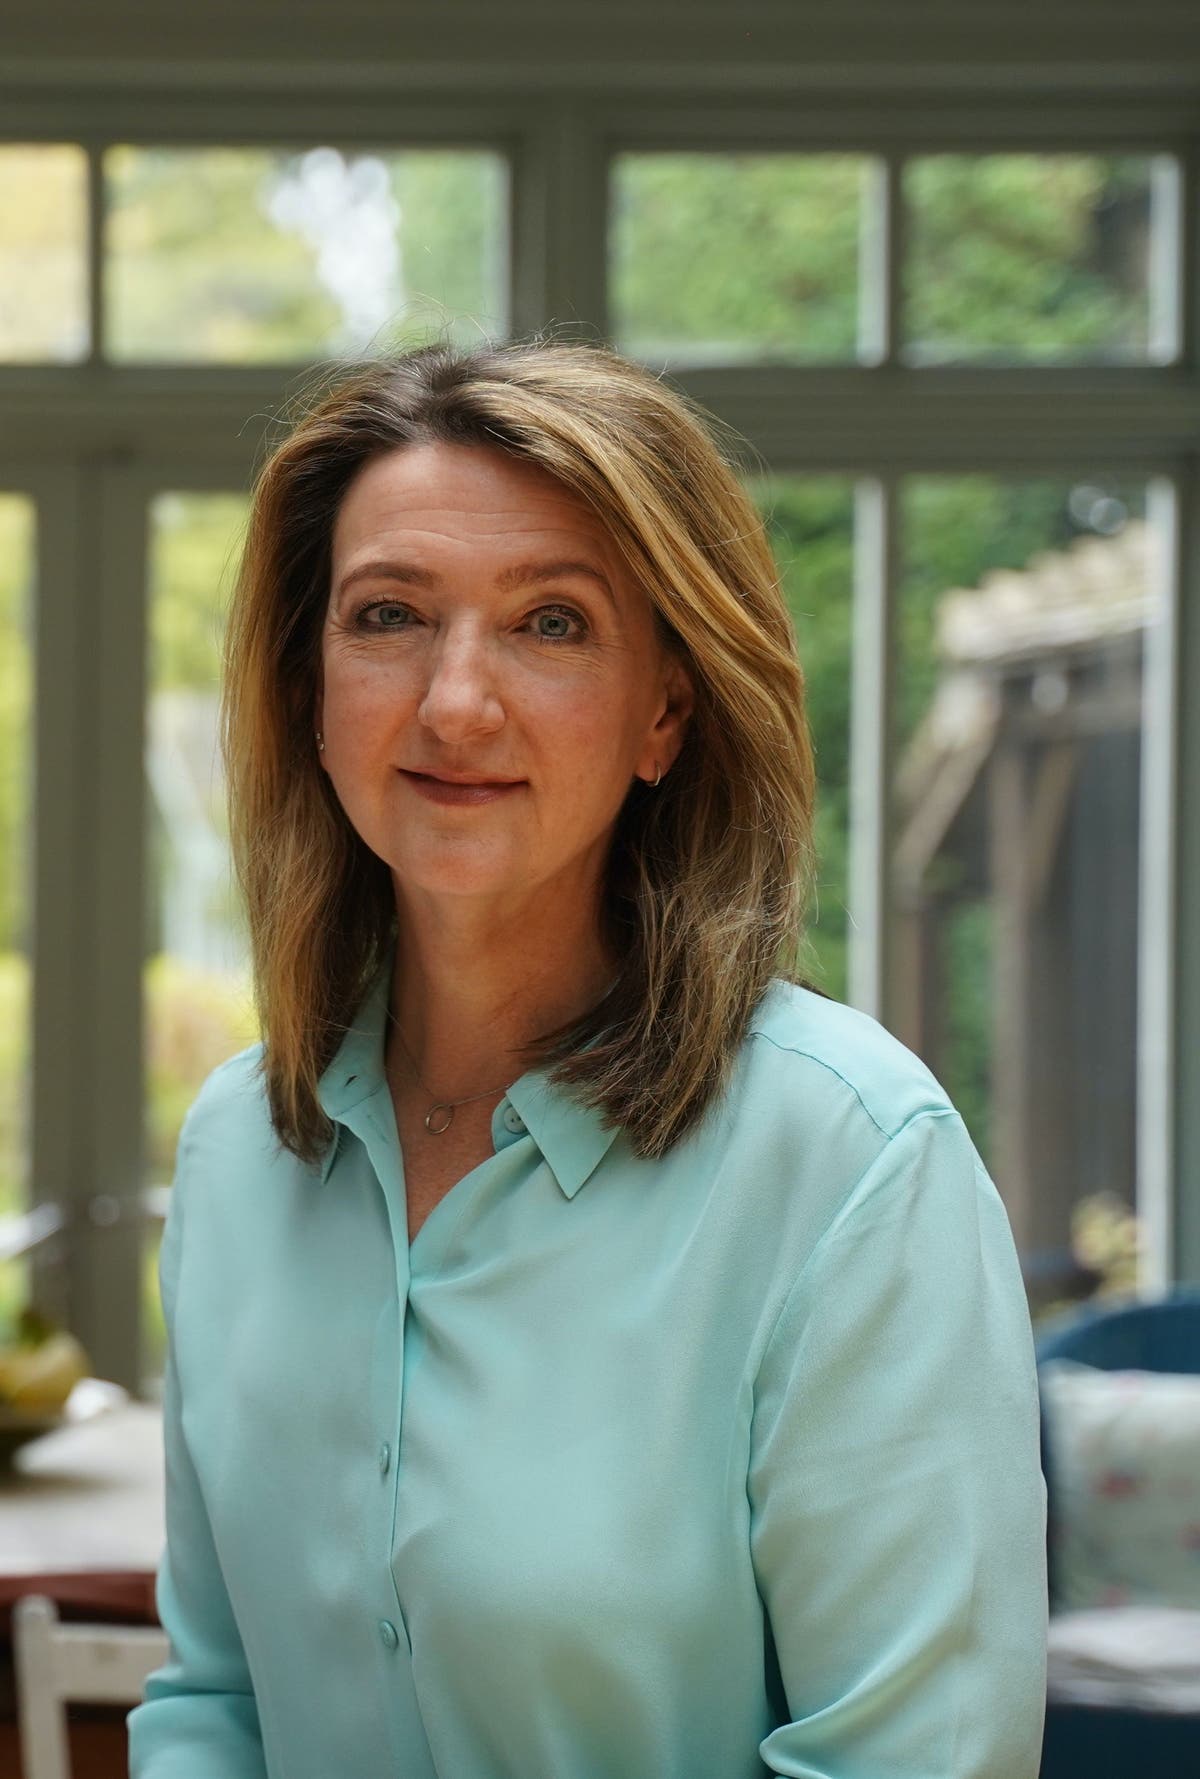 Victoria Derbyshire reassures cancer sufferers of NHS ‘expertise and compassion’